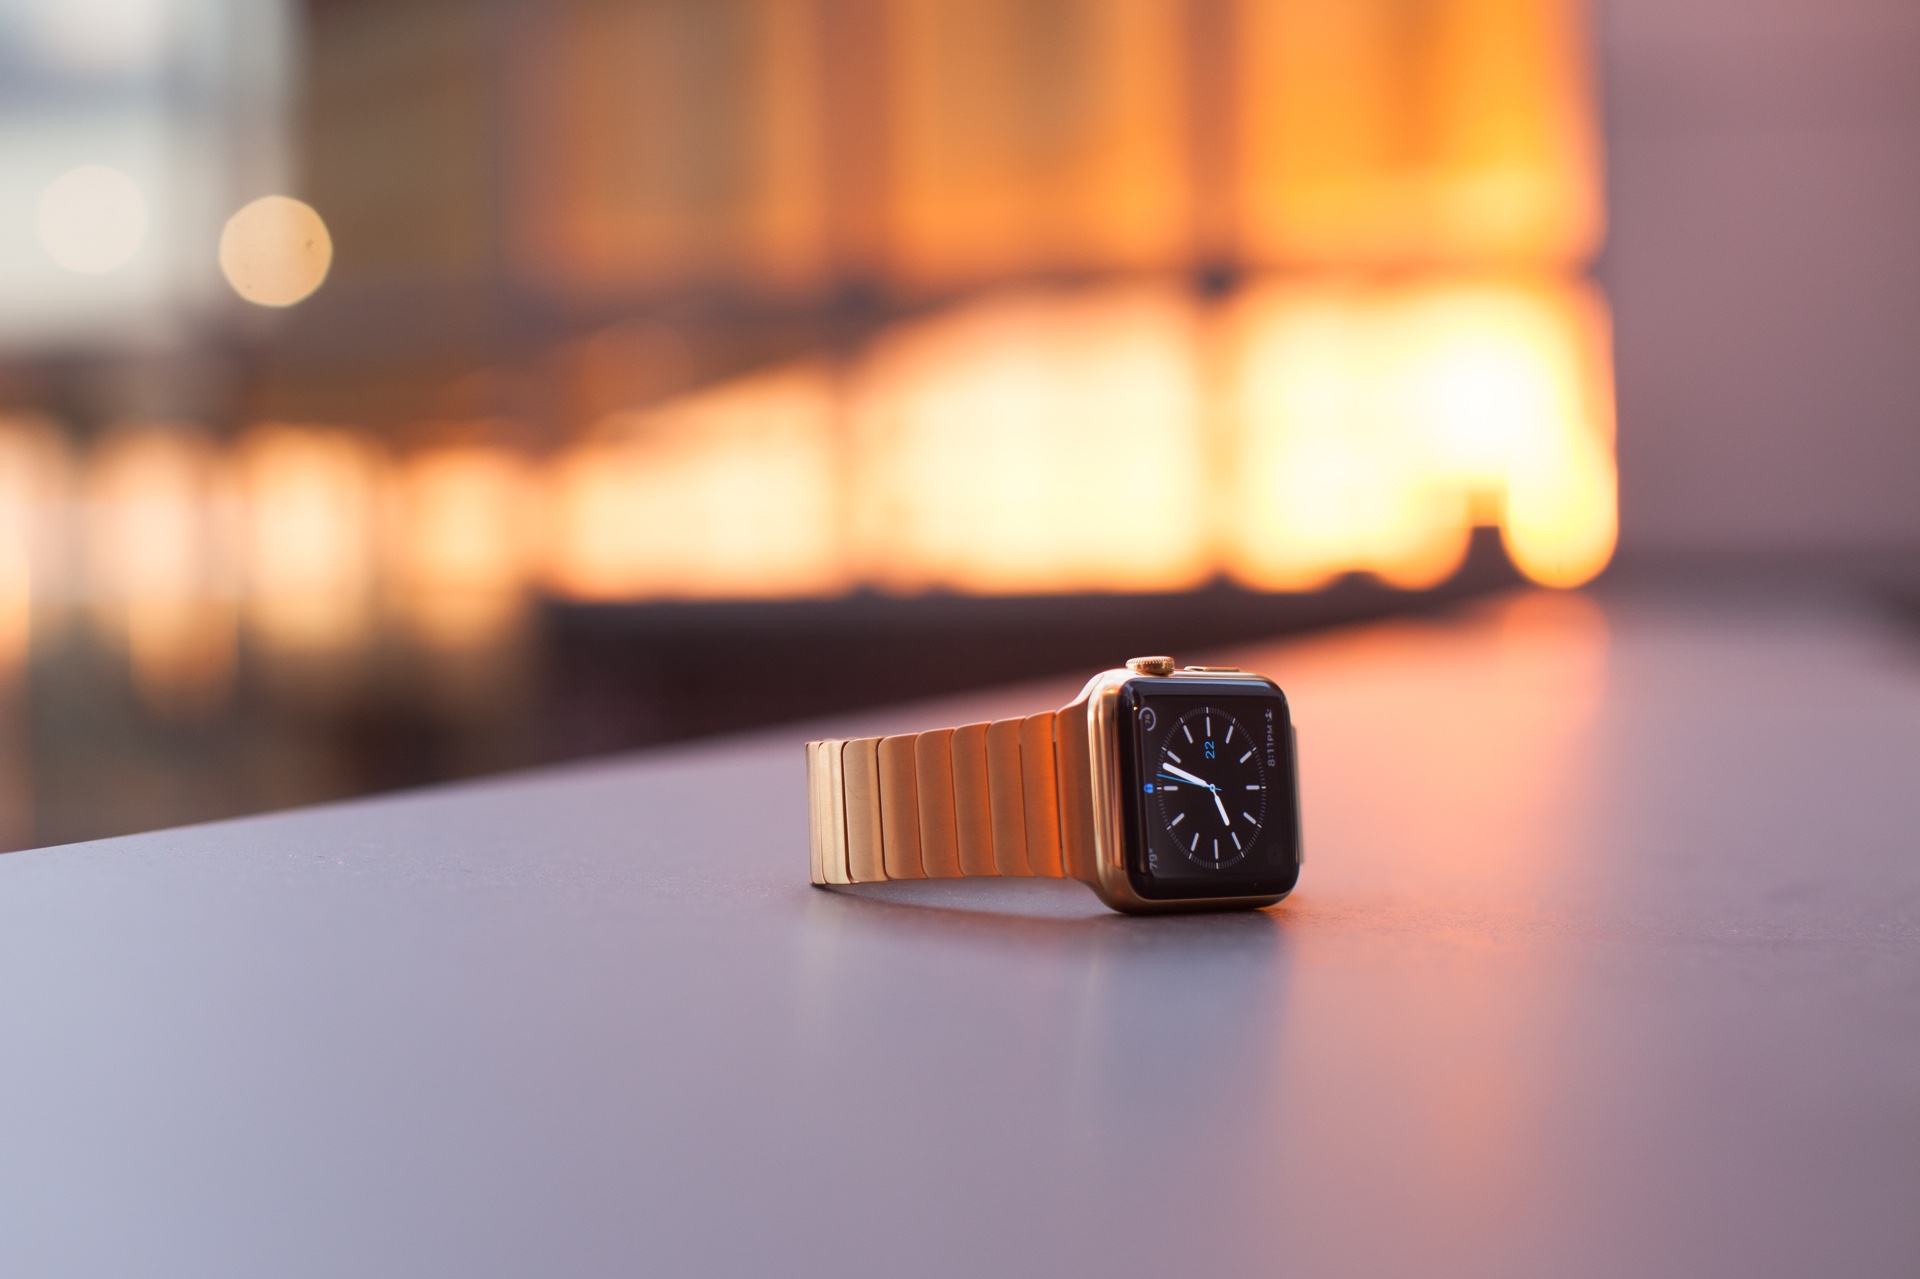 Check out images of a gold-plated Apple Watch (stainless steel)